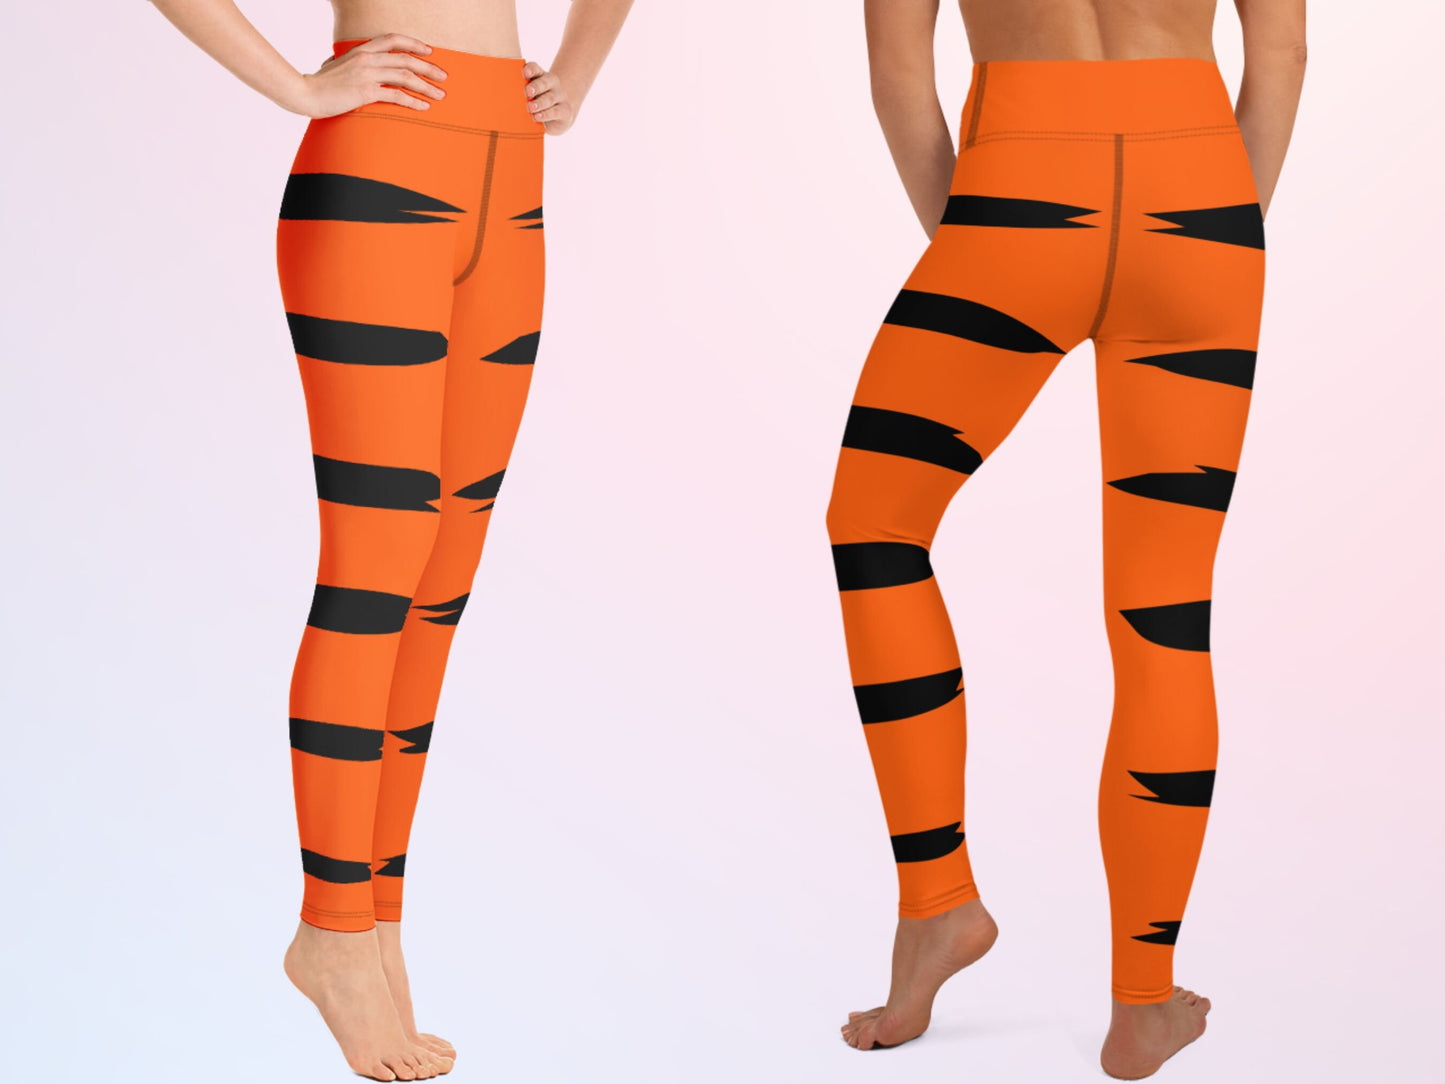 Winnie the Pooh Tigger with Tail Sports Activewear, Halloween, Cosplay, Gift for Her, Birthday Gift, Birthday Party, Plus Size Leggings